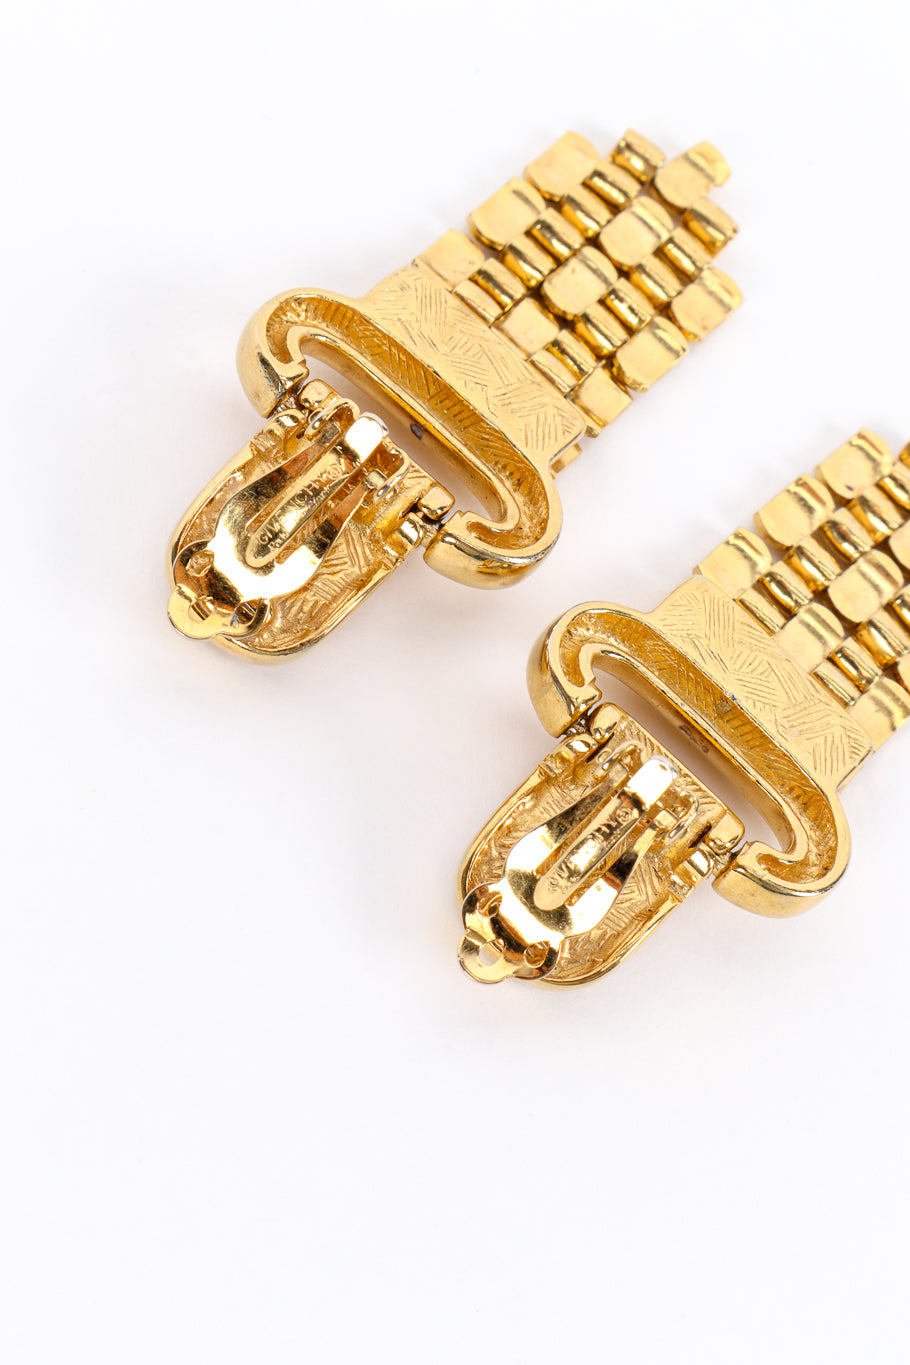 Vintage Givenchy Crystal Panther Chain Drop Earrings back signature closeup @recess la